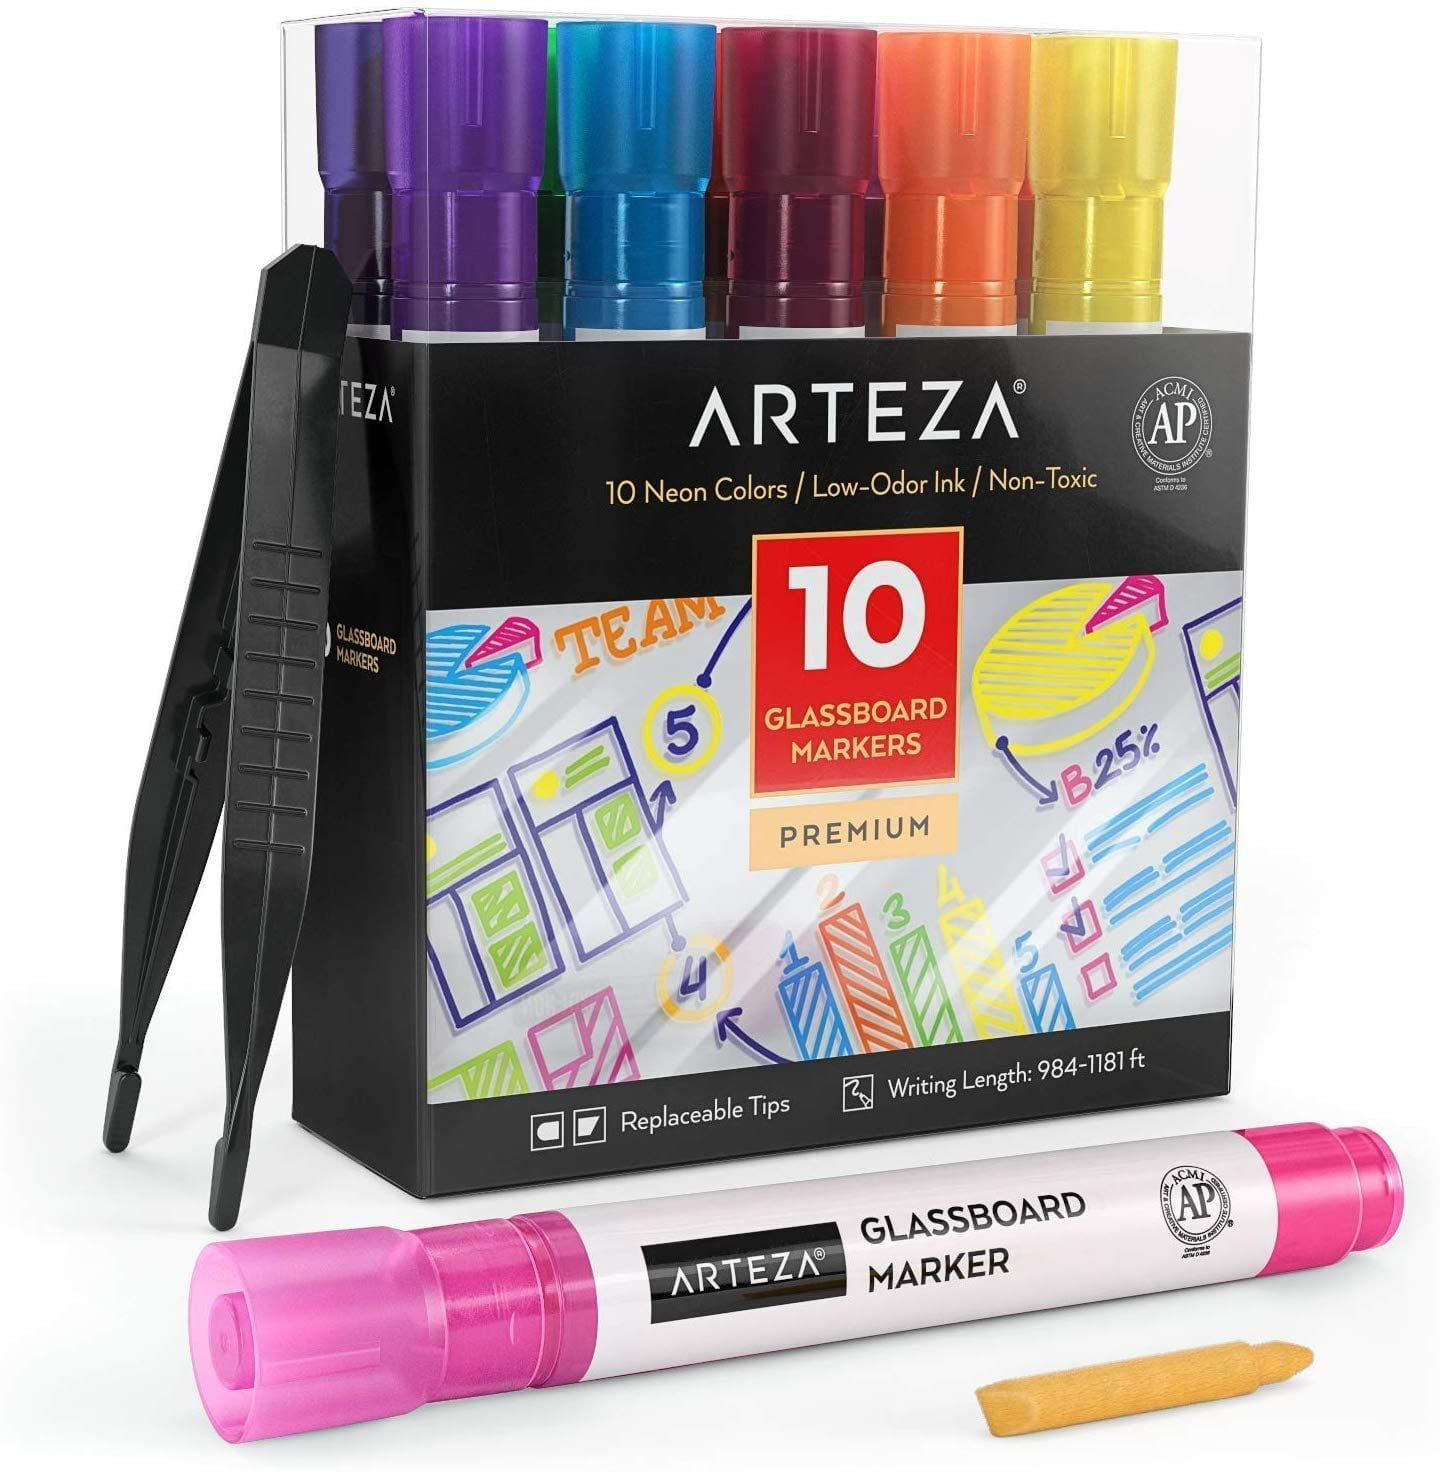  maxtek Wet Erase Markers Ultra Fine Tip, Assorted Colors, Low  Odor, Smudge Free Semi-permanent Markers for Laminated Calendars, Glass,  Window, Acrylic Board, Dry Erase Whiteboard : Office Products